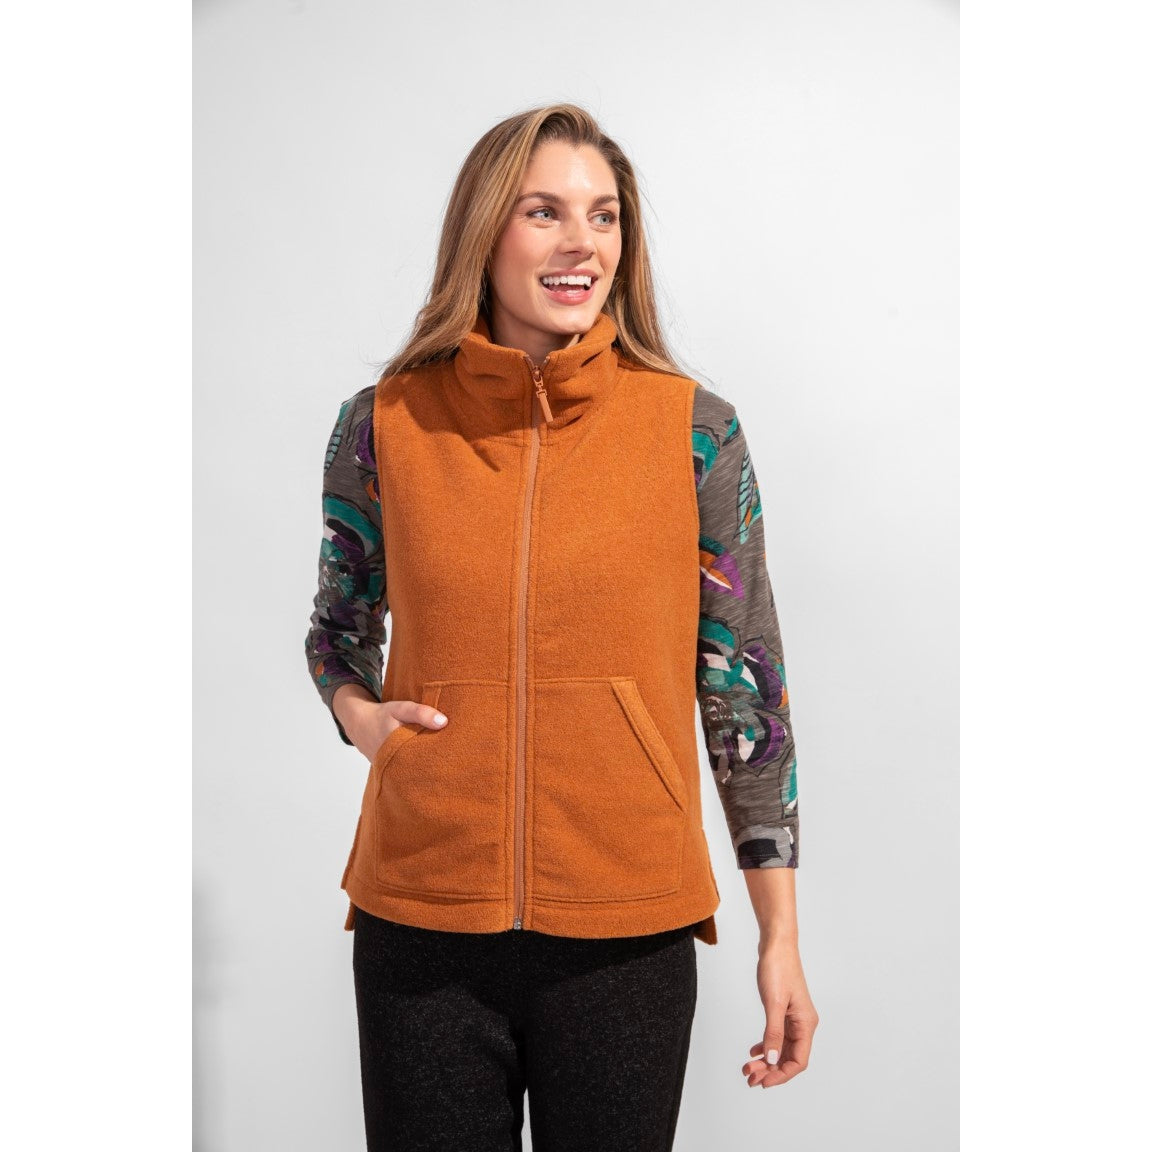 ZIP STAND UP COLLAR VEST - SPICE-Jackets & Sweaters-ESCAPE-SMALL-SPICE-Coriander